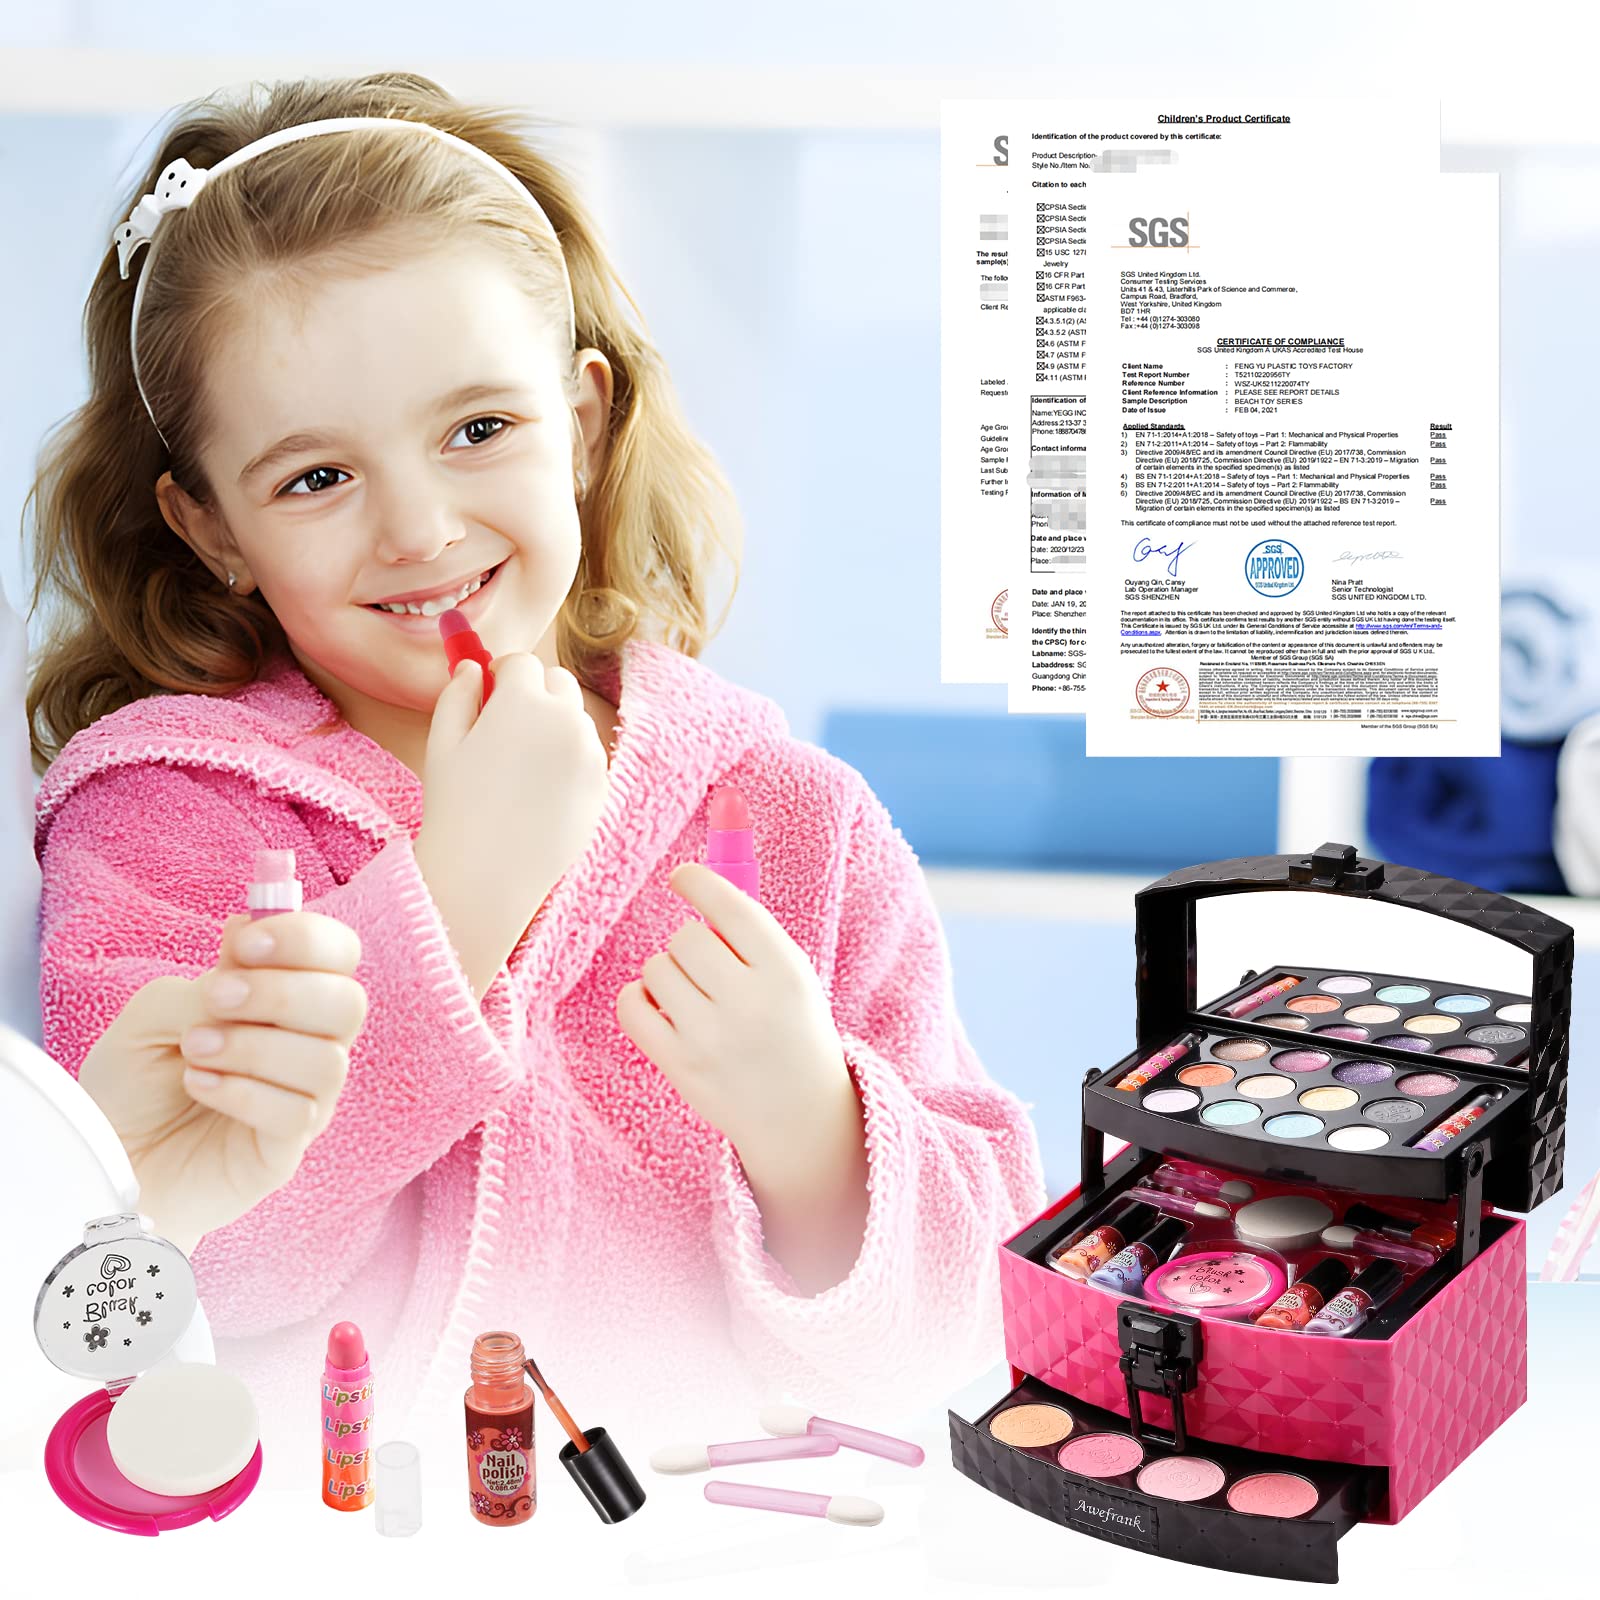 AWEFRANK Kids Makeup Kit for Girls Toys, Toddler Makeup Set, Real Safe & Non-Toxic & Washable for Endless Fun and Creativity, Perfect Princess Gift & Valentines Day Gifts for Ages 3-12